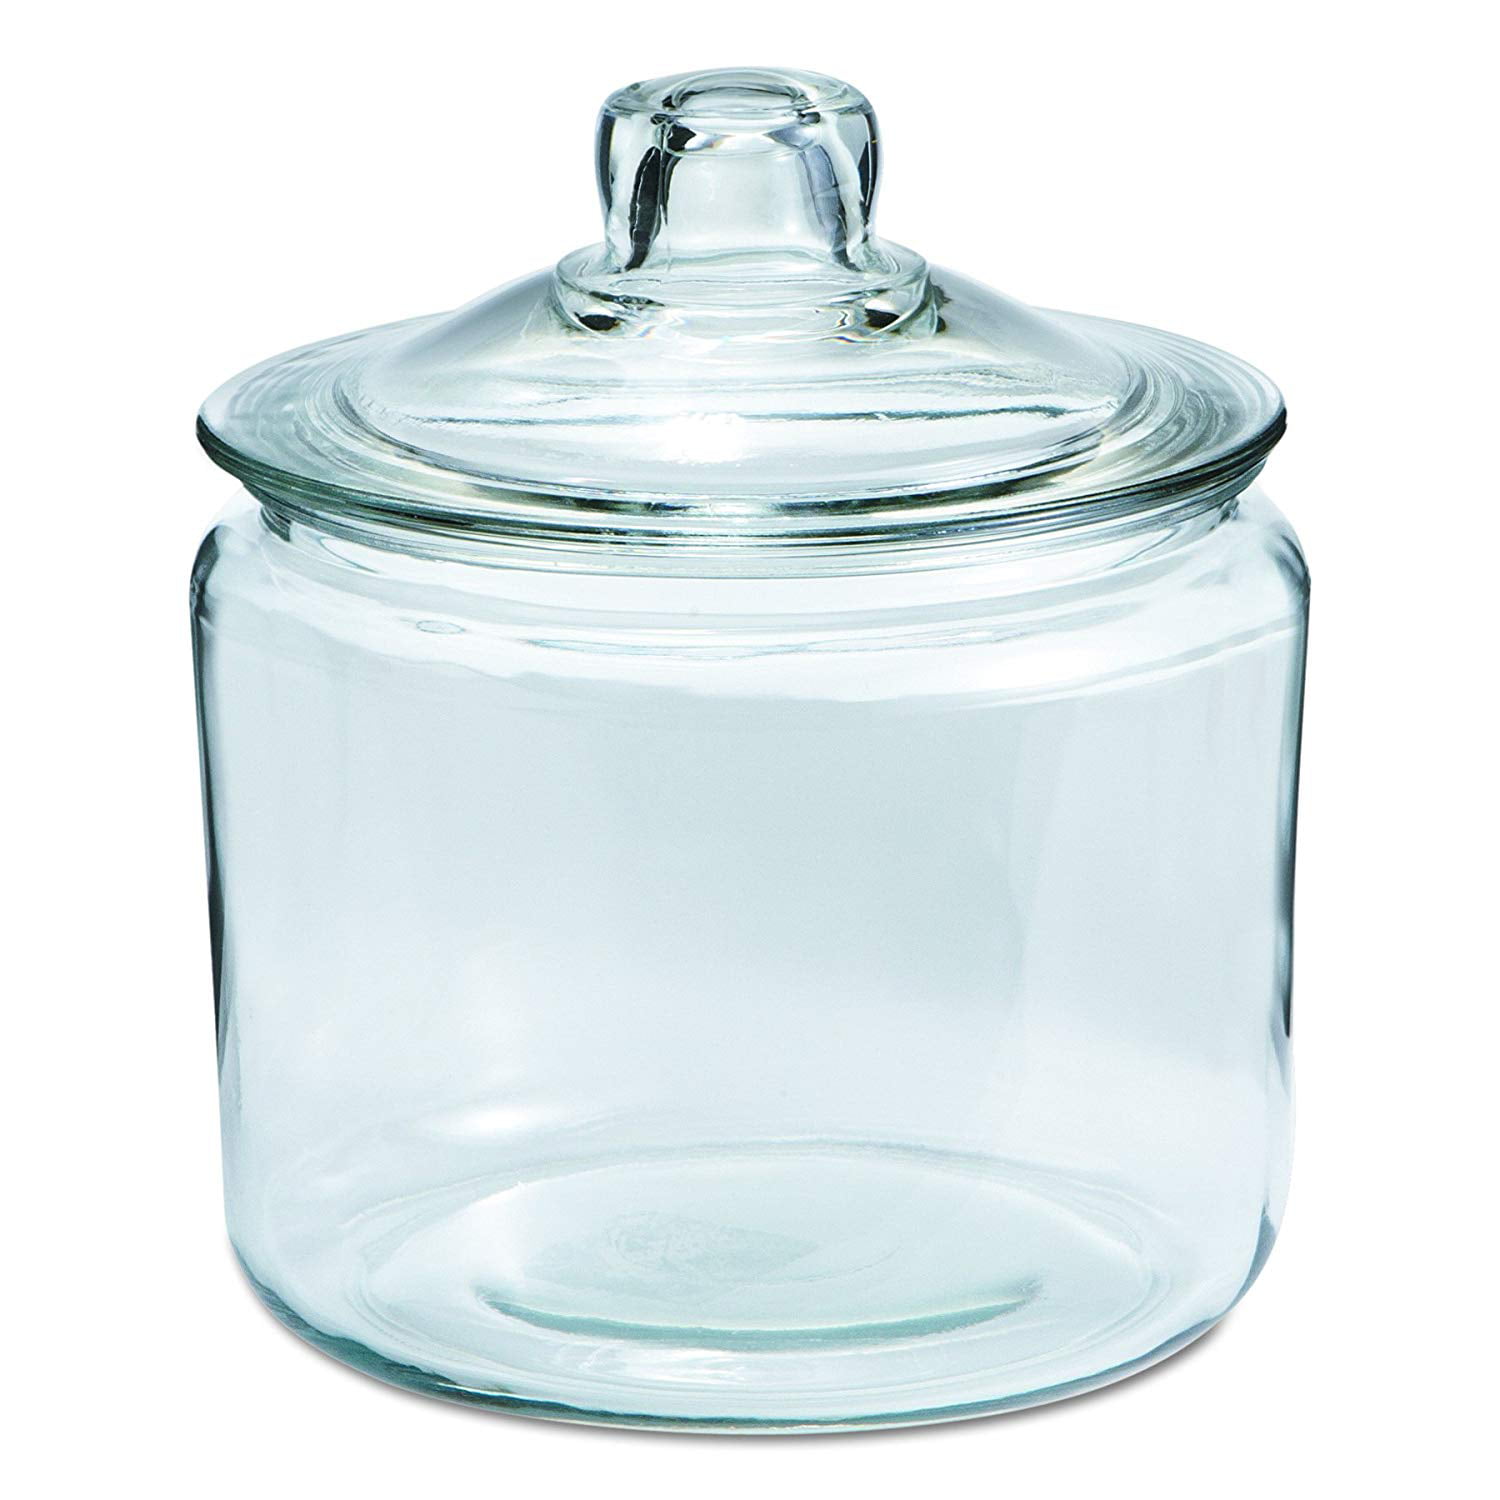 Anchor Hocking Heritage Hill 1-Gallon Storage Jar Clear Home Kitchen Container 